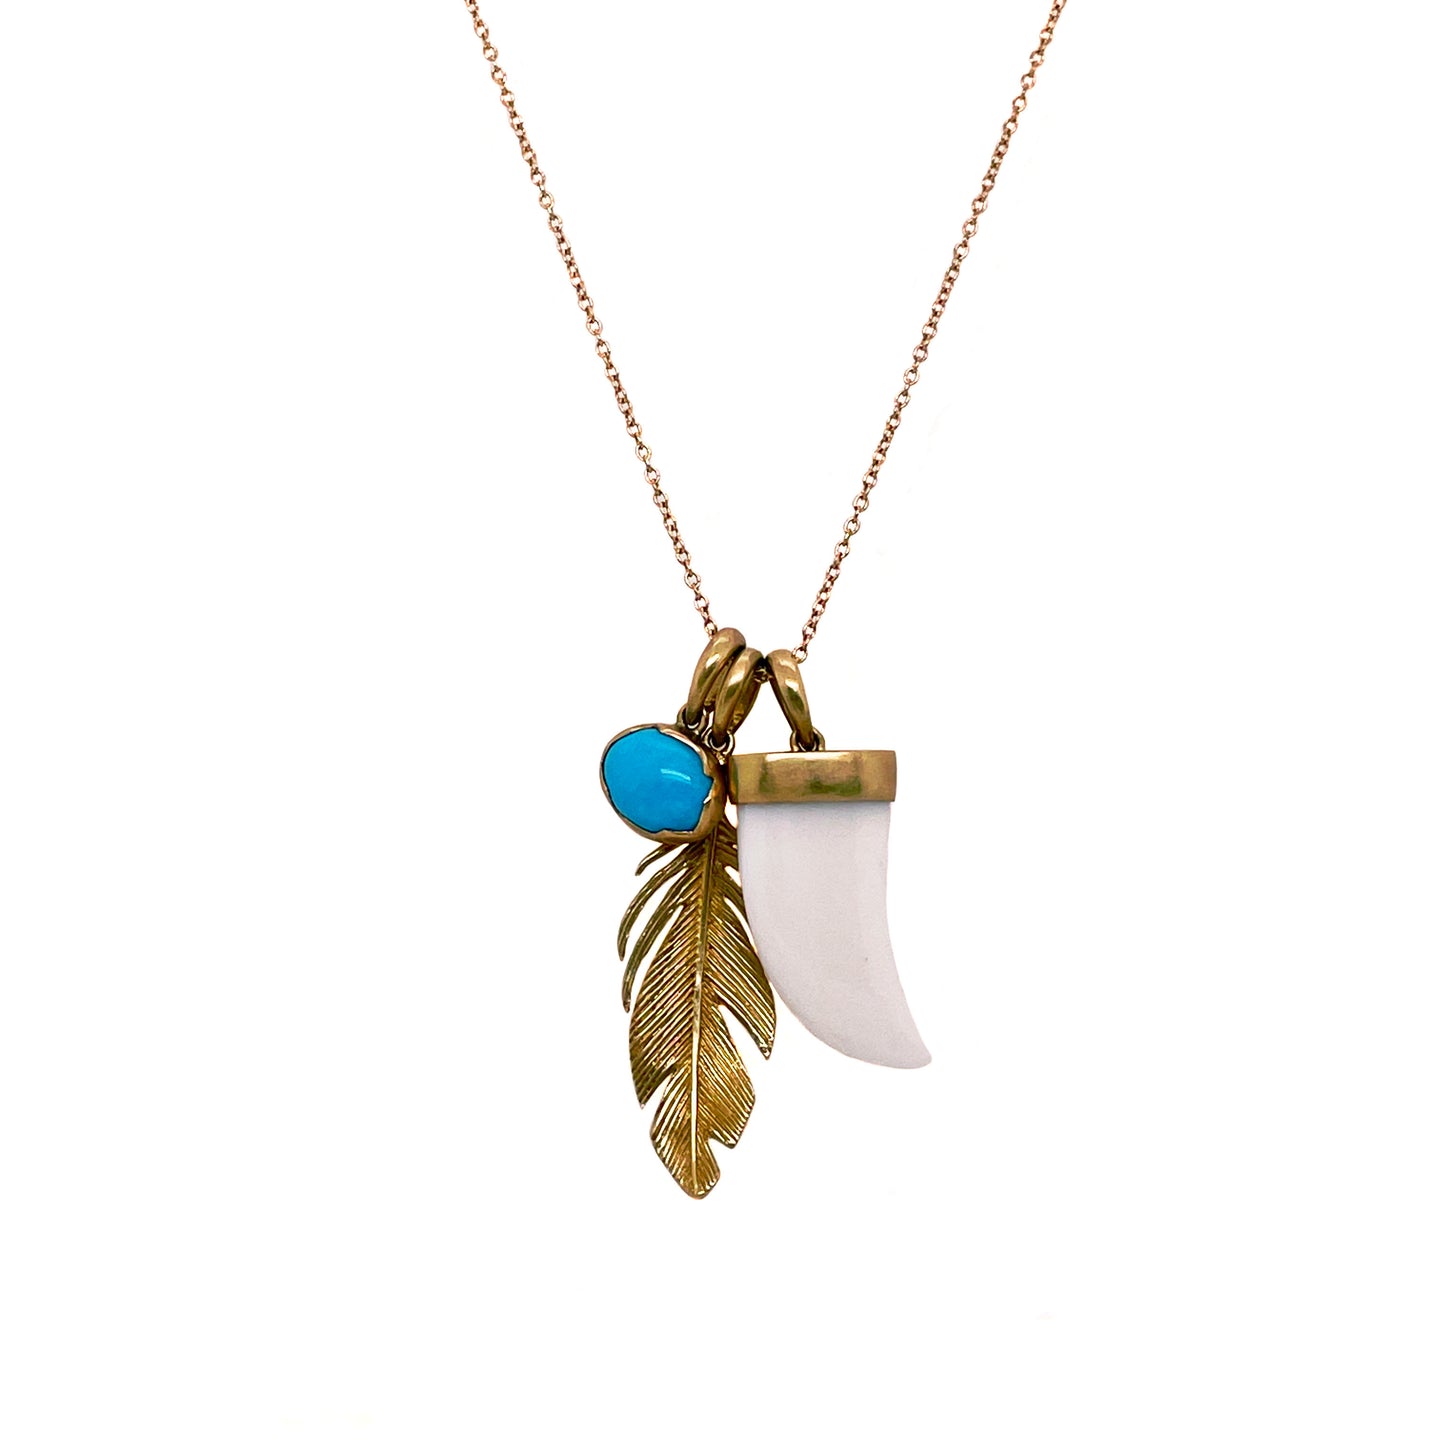 Turquoise, White Agate, and Feather Scavenger Necklace